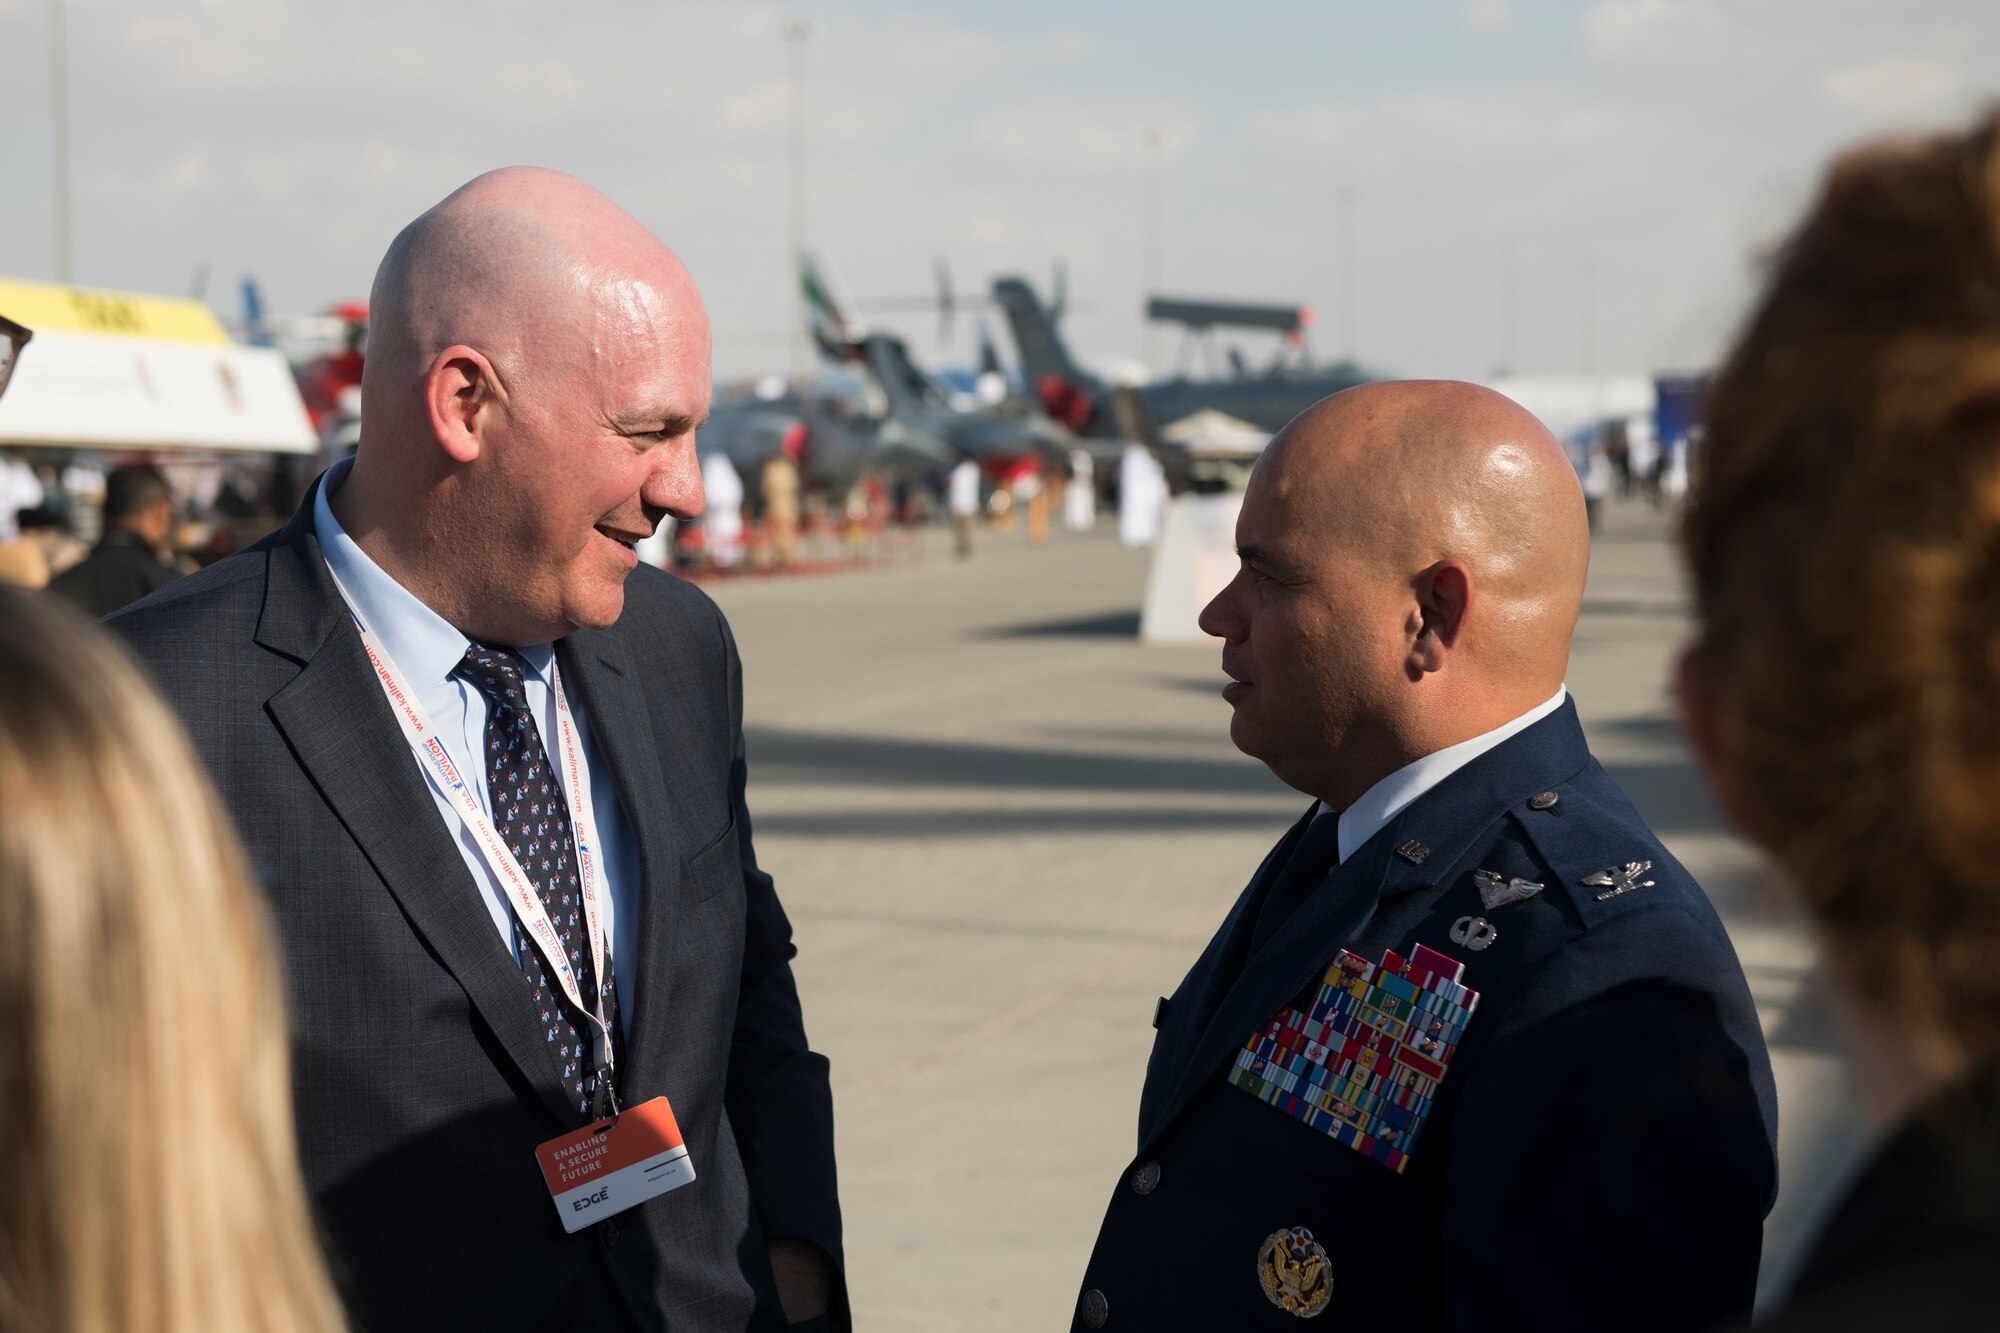 R. Clarke Cooper, left, Assistant Secretary of State for Political-Military Affairs, greets U.S. Air Force Col. Thomas Goulter, Director of Theater Security Cooperation for U.S. Air Forces Central Command, at the Dubai Airshow, United Arab Emirates, Nov. 17, 2019.